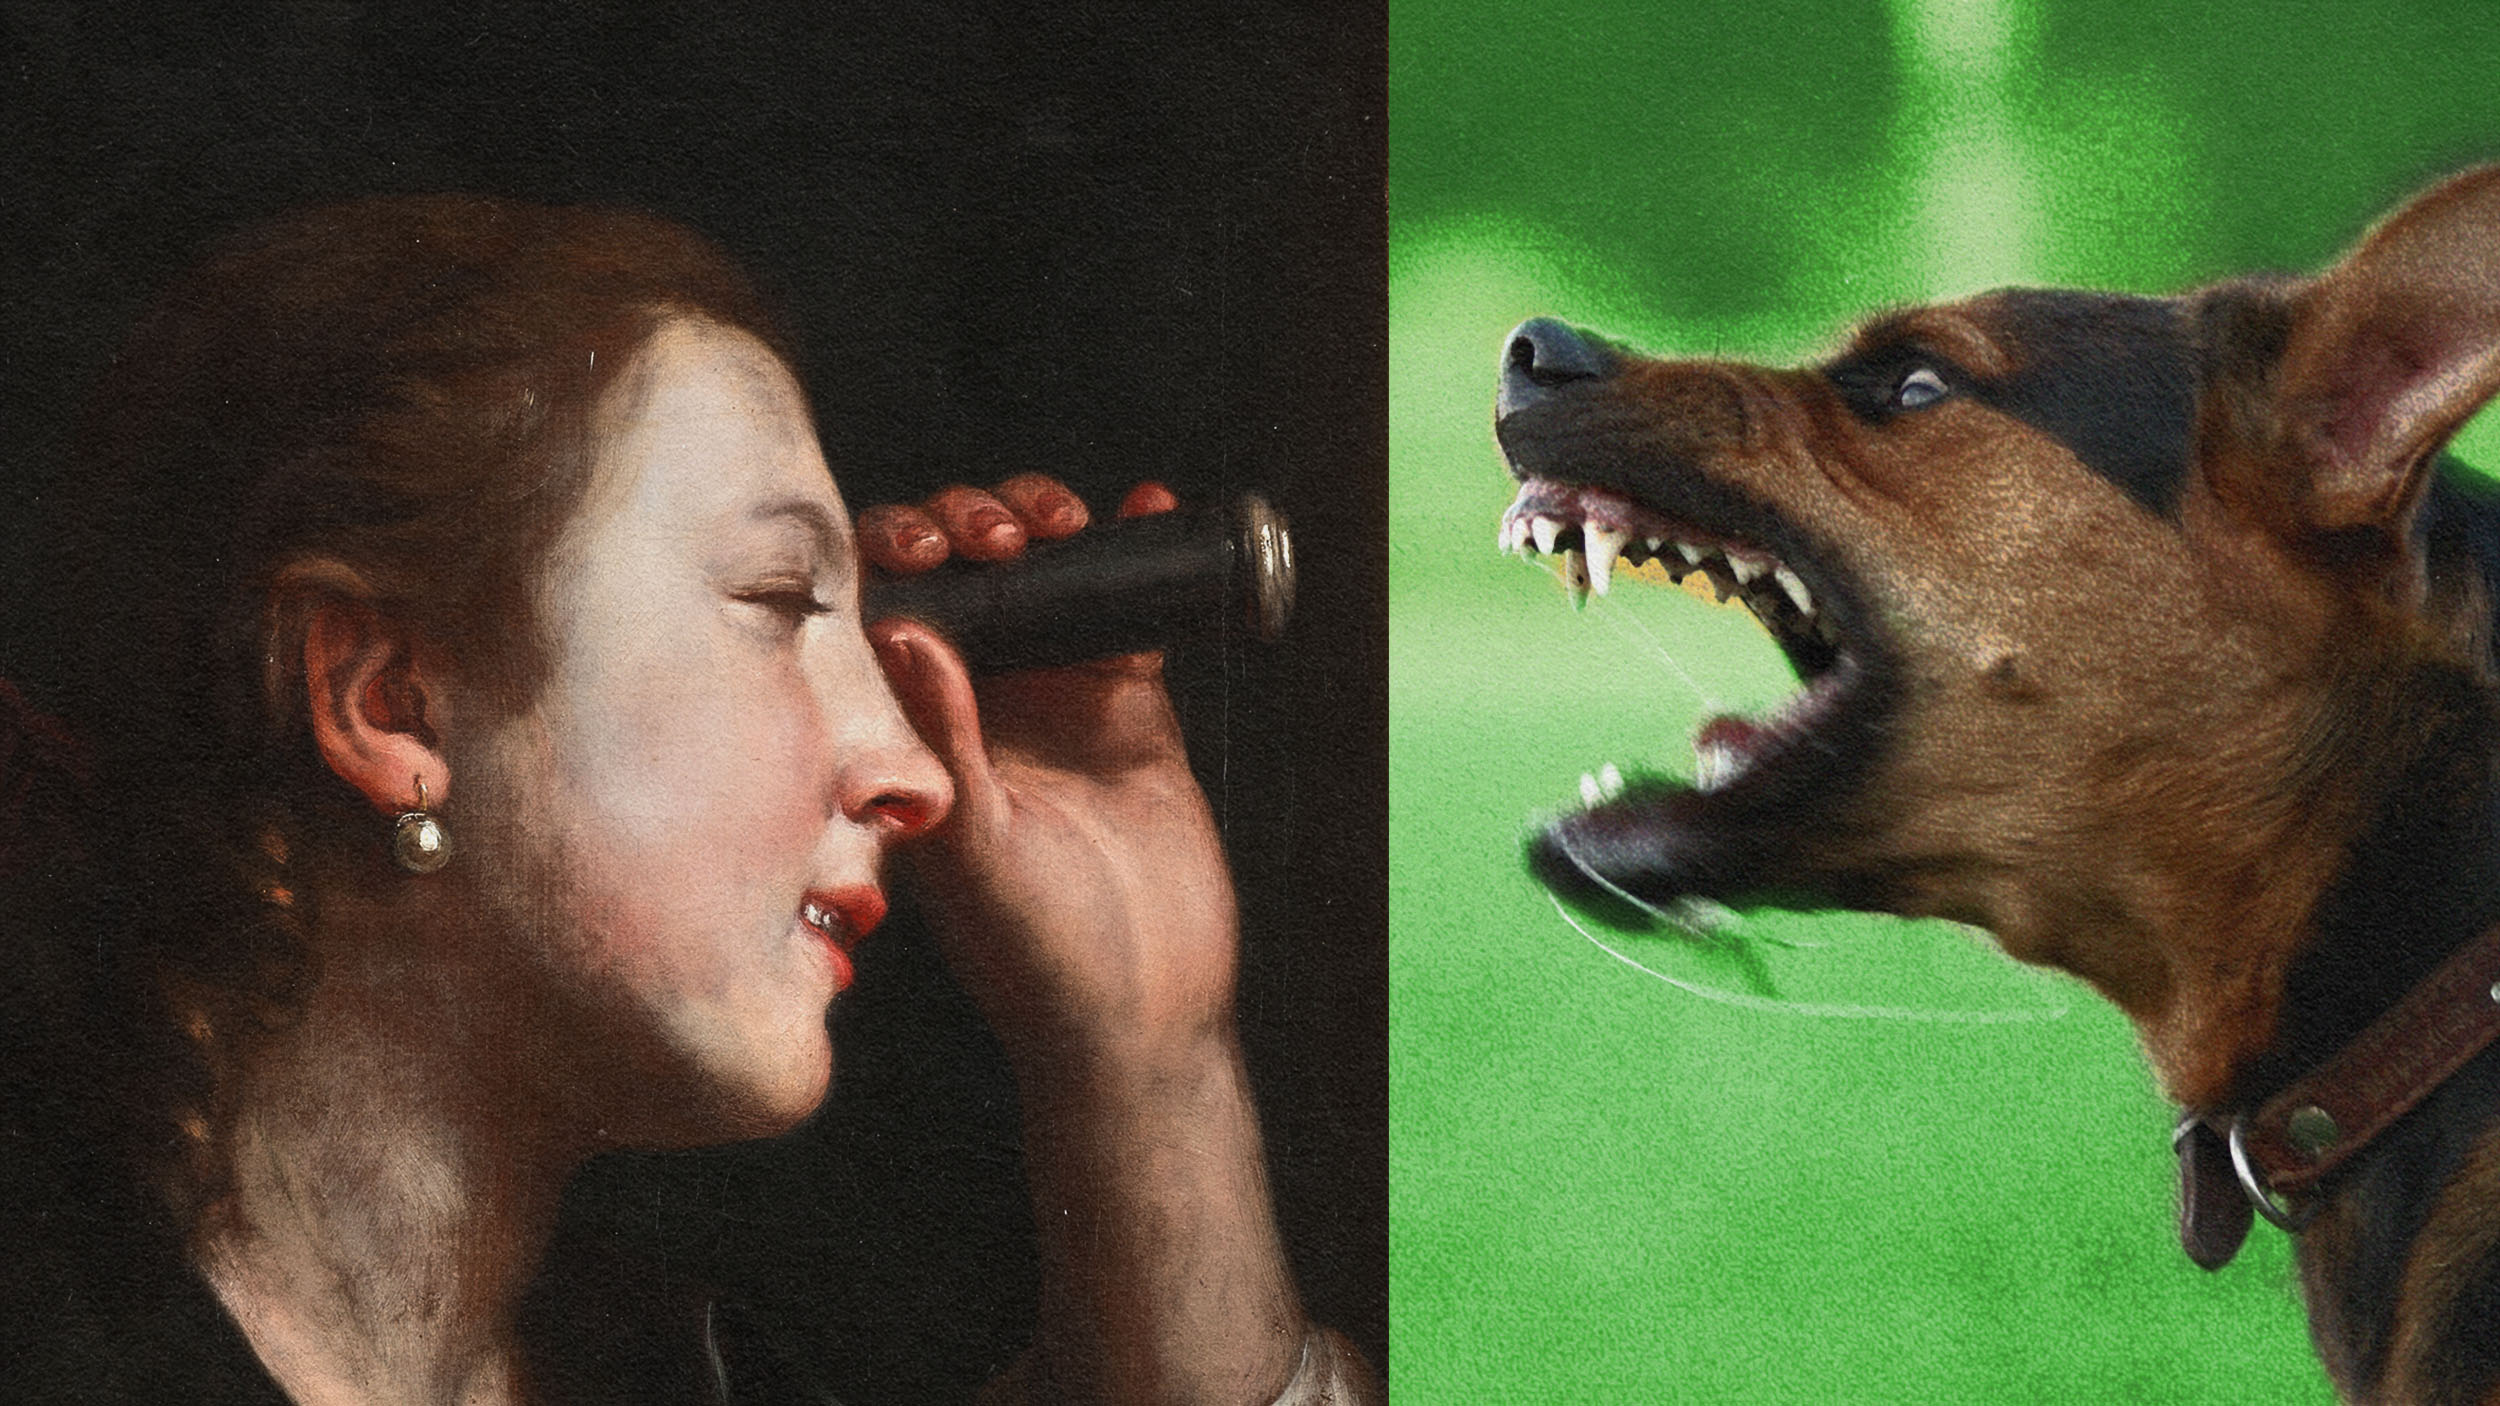 Split image: on the left, a woman using a spyglass, and on the right, fury depicted by an aggressive dog barking.